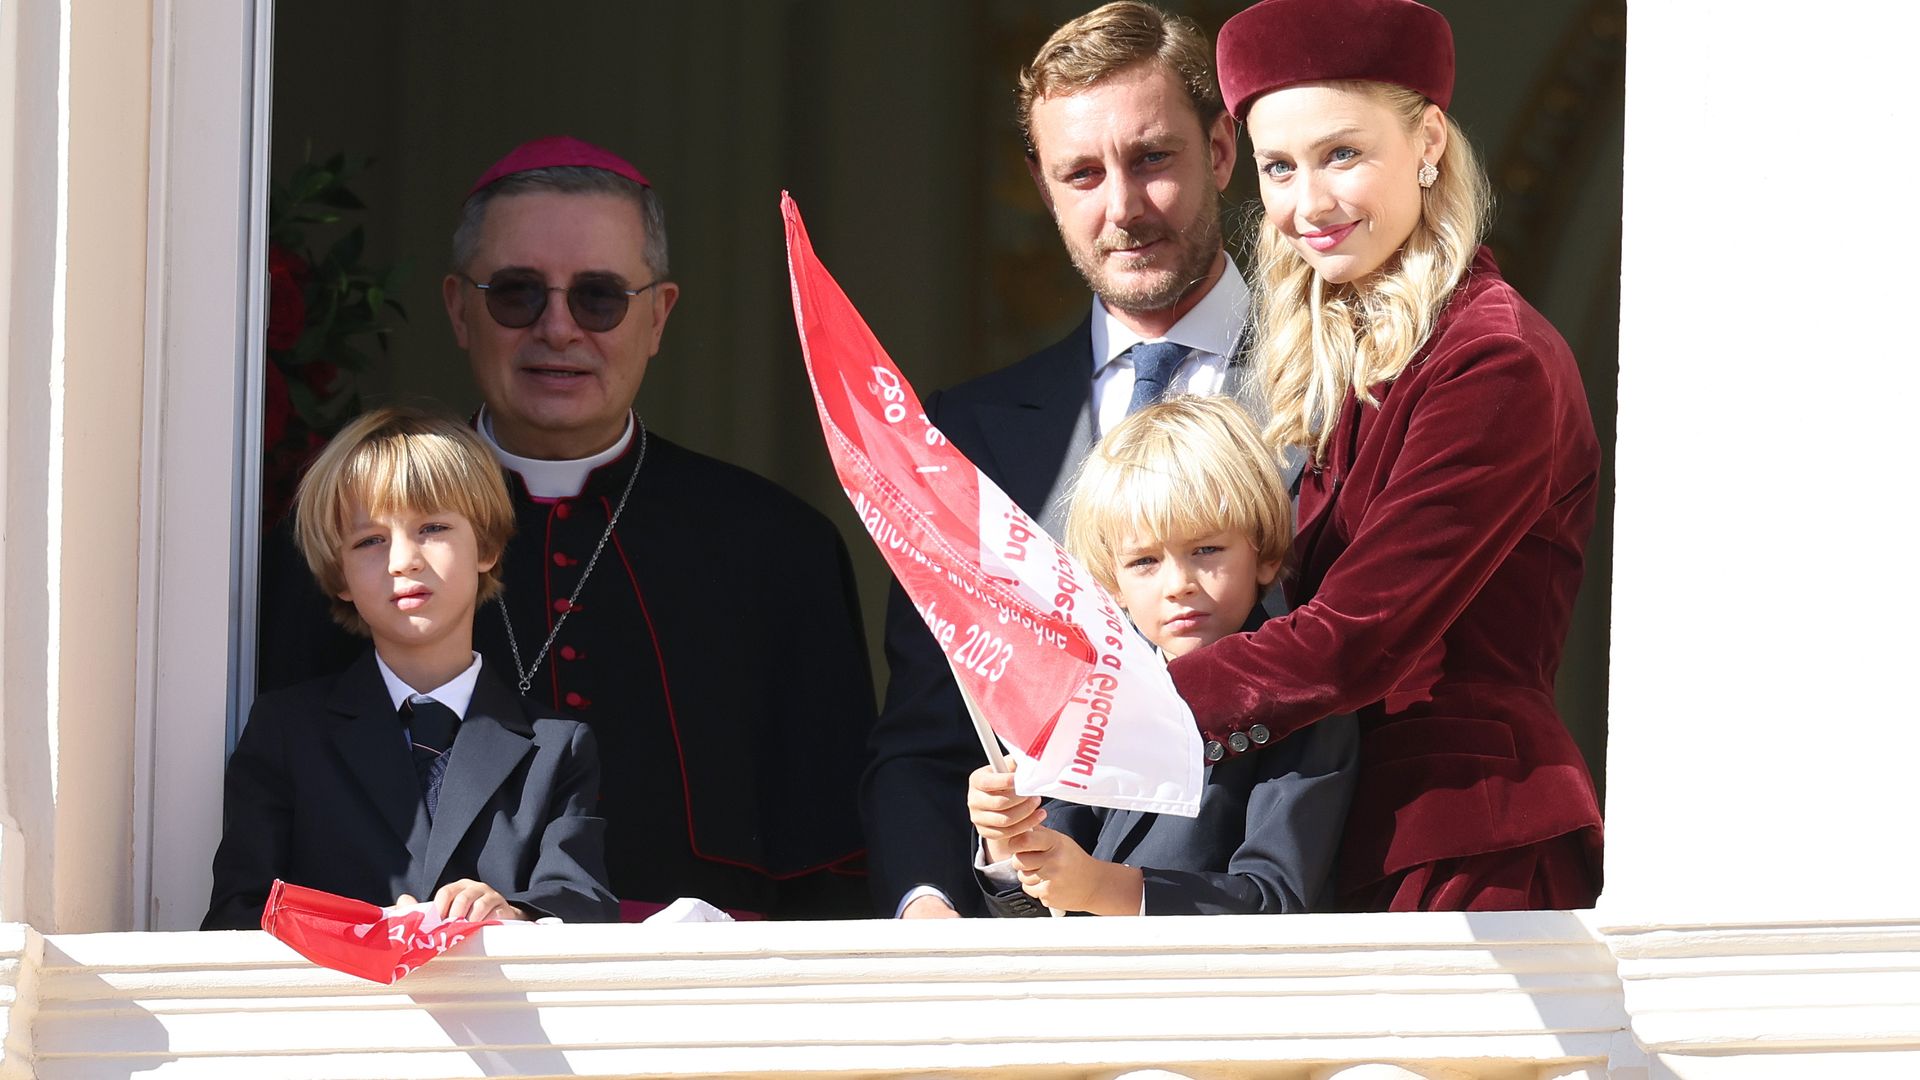 Pierre Casiraghi and Beatrice Borromeo with sons Stefano and Francesco Casiraghi 